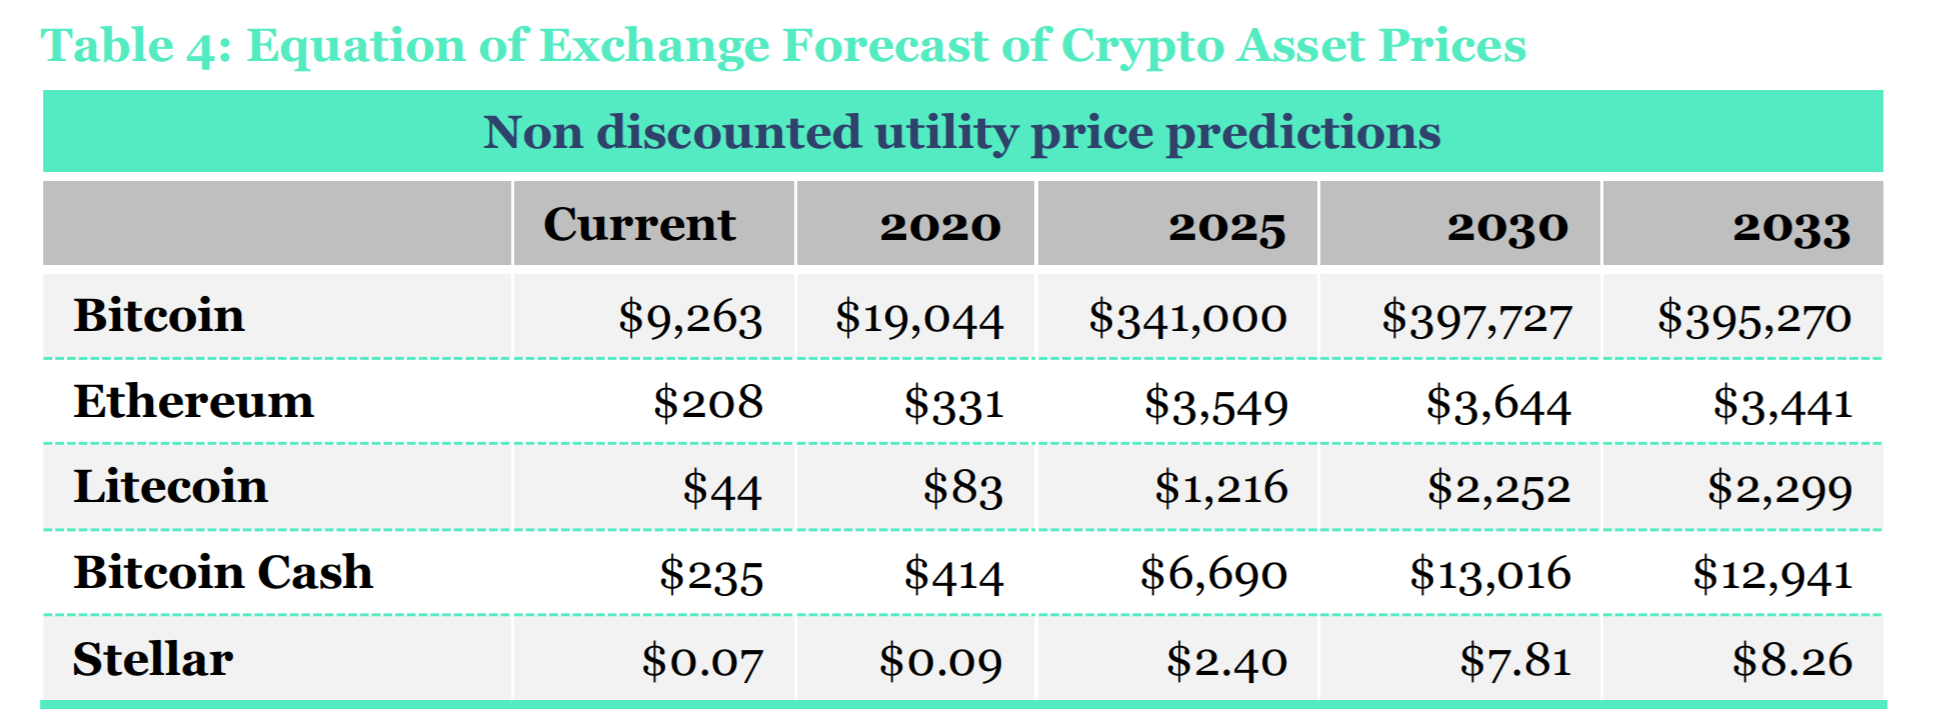 Comprehensive Analysis Predicts Bitcoin Price Near $20K This Year, $398K by 2030